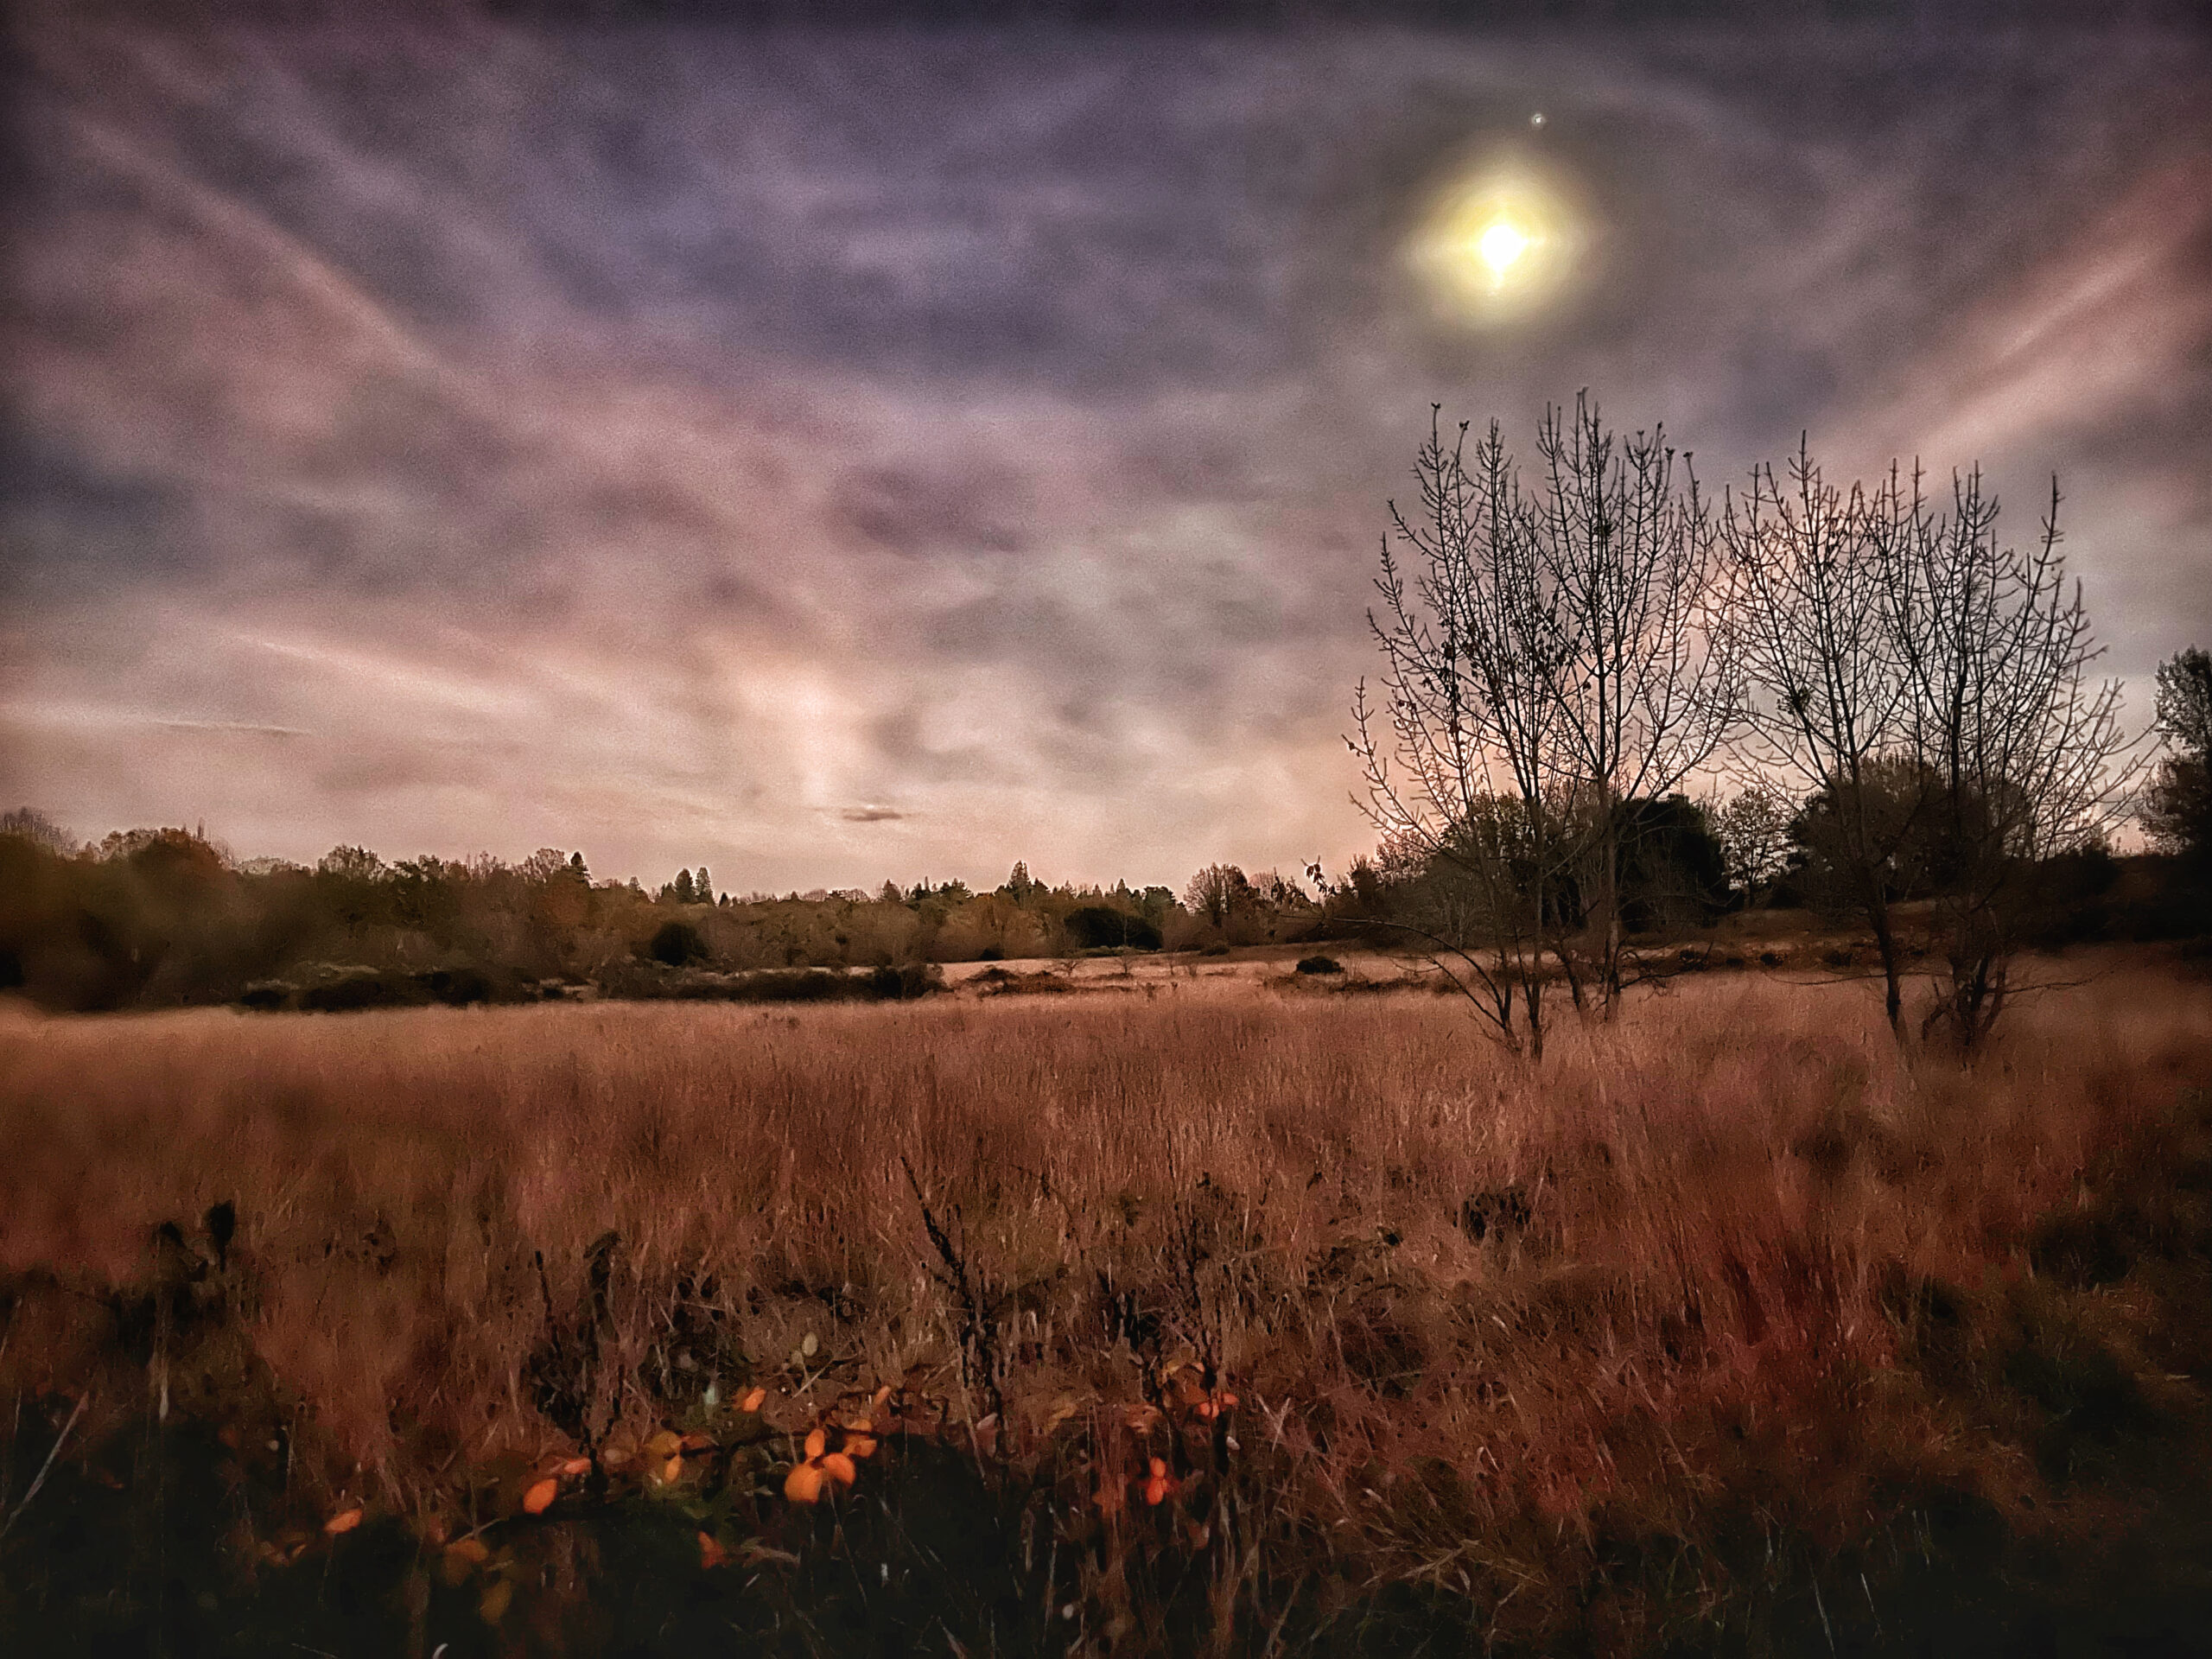 A moon in the sky over a grassy field.